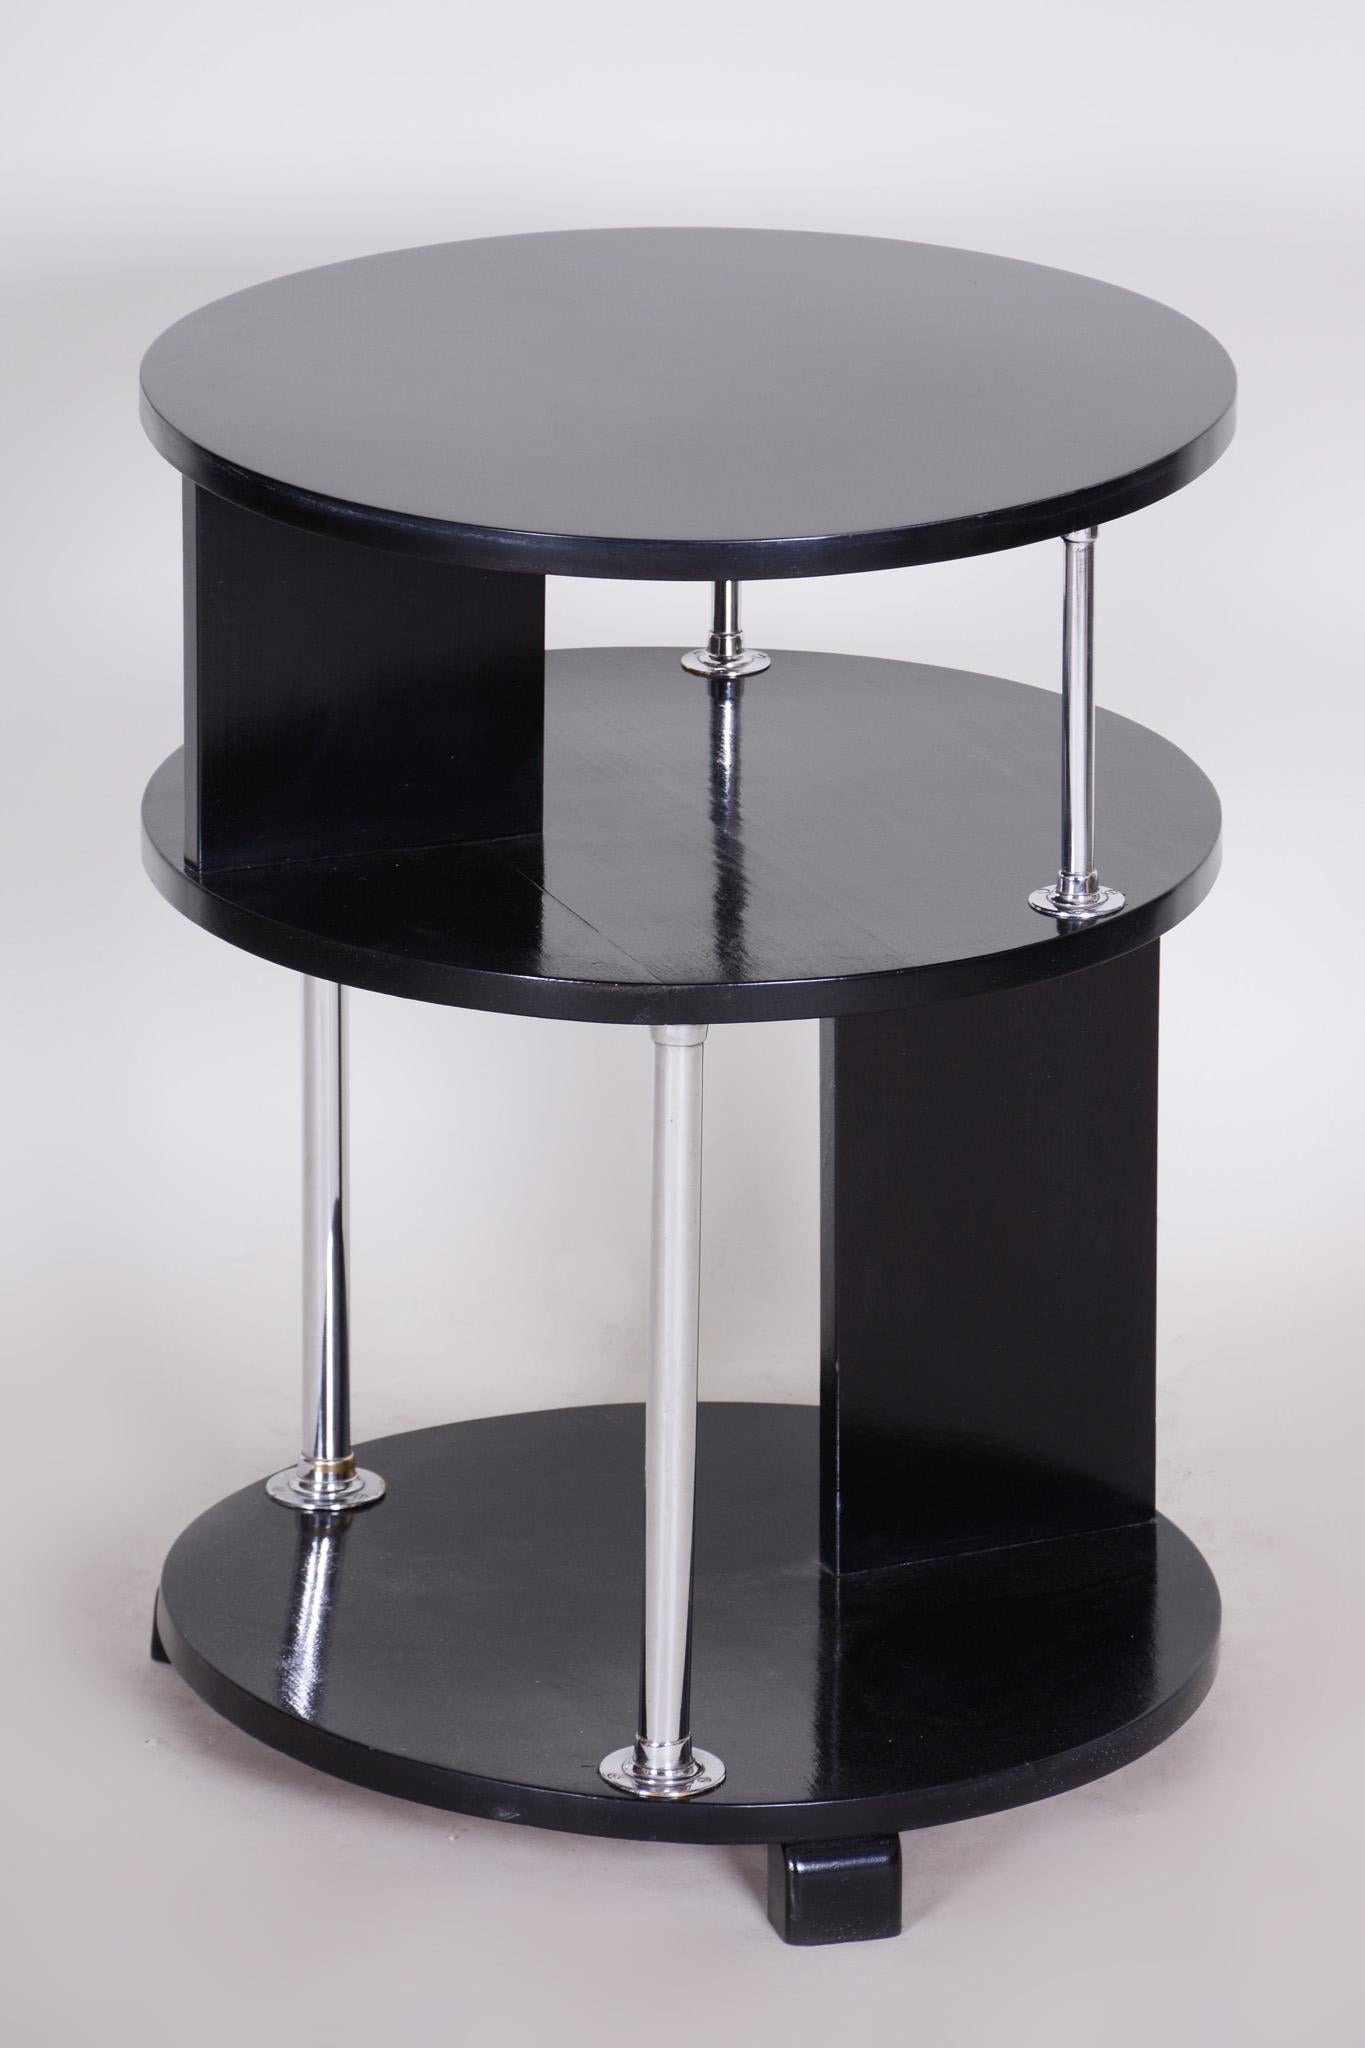 Unusual Small Czech Restored Round Black Beech Chrome Bauhaus Table, 1930s For Sale 6